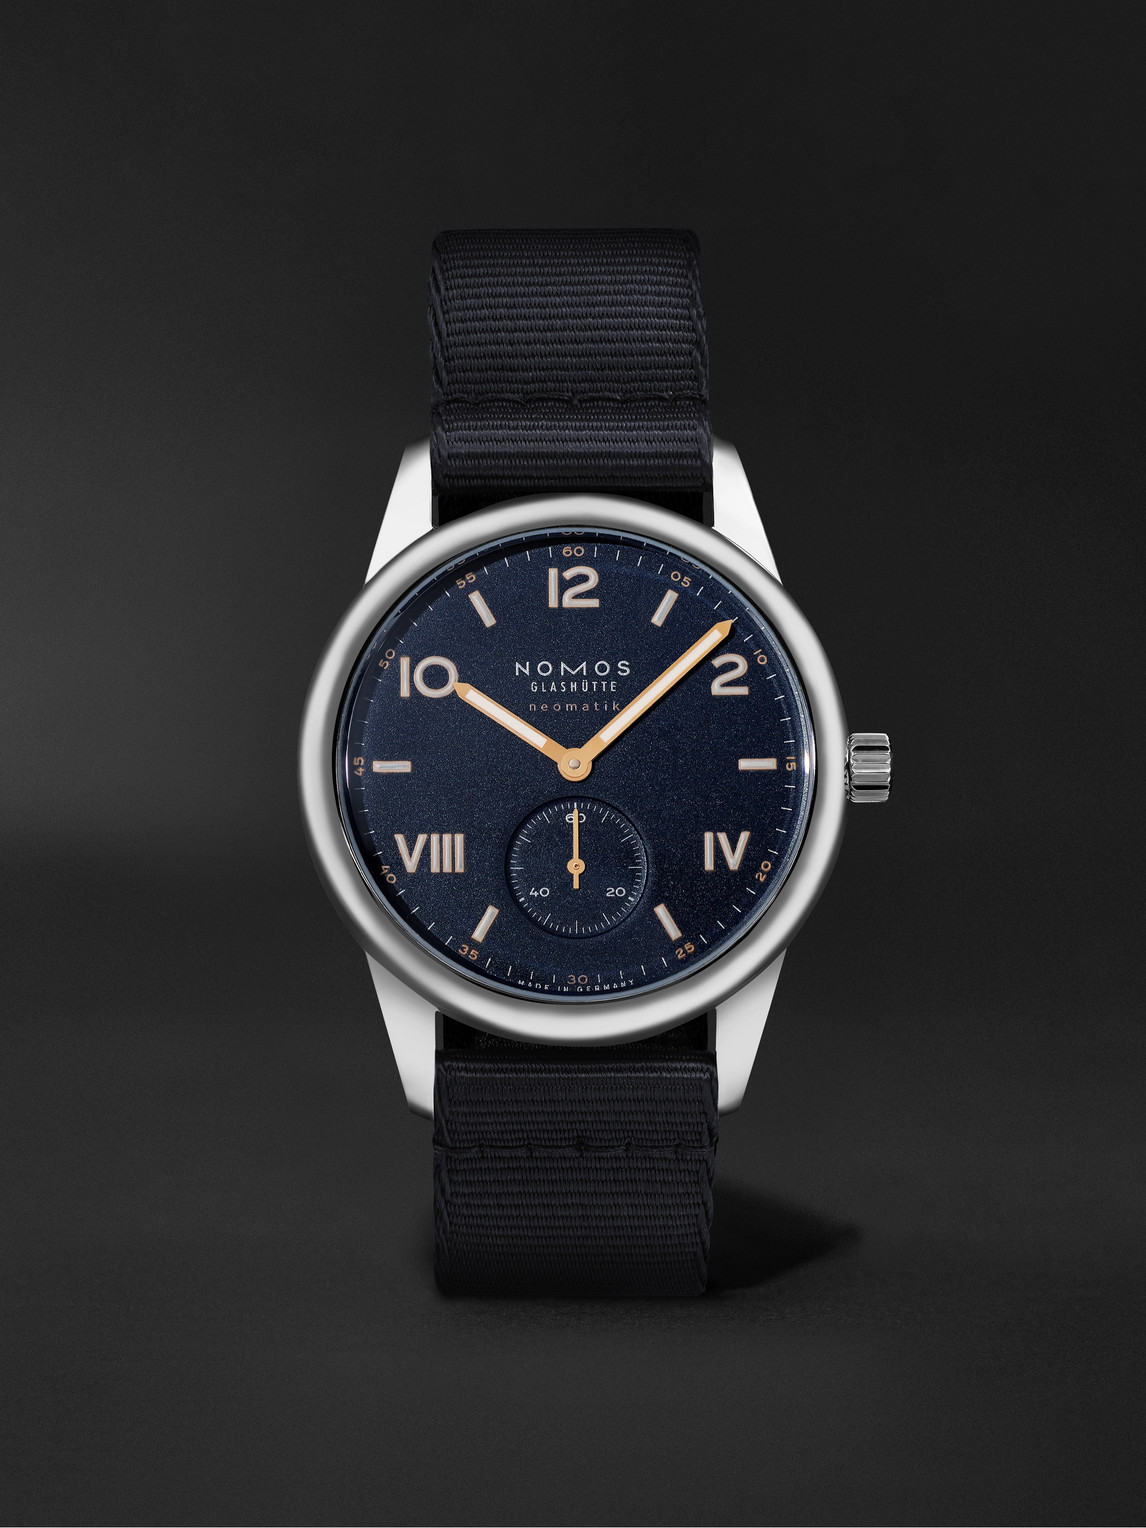 Nomos Glashütte Club Campus Neomatik Automatic 39.5mm Stainless Steel And Canvas Watch, Ref. No. 767 In Blue